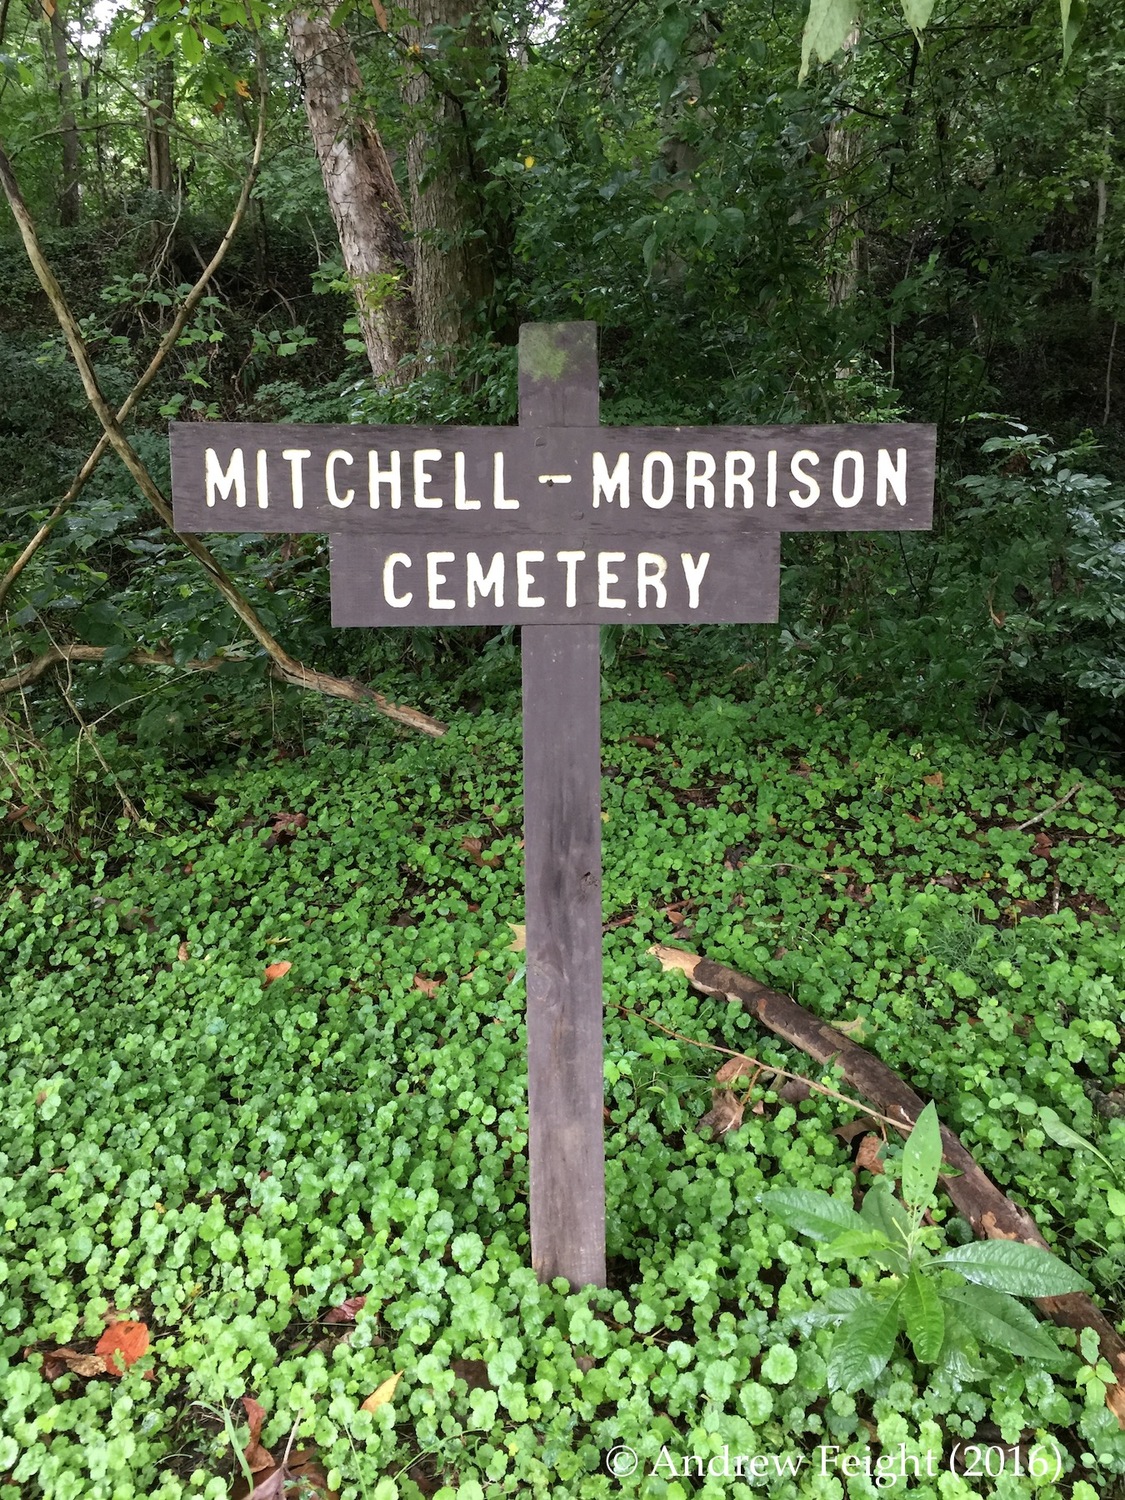 Mitchell-Morrison Cemetery, Moore's Run, Shawnee Backcountry Management Area, Shawnee State Forest, Scioto County, Ohio